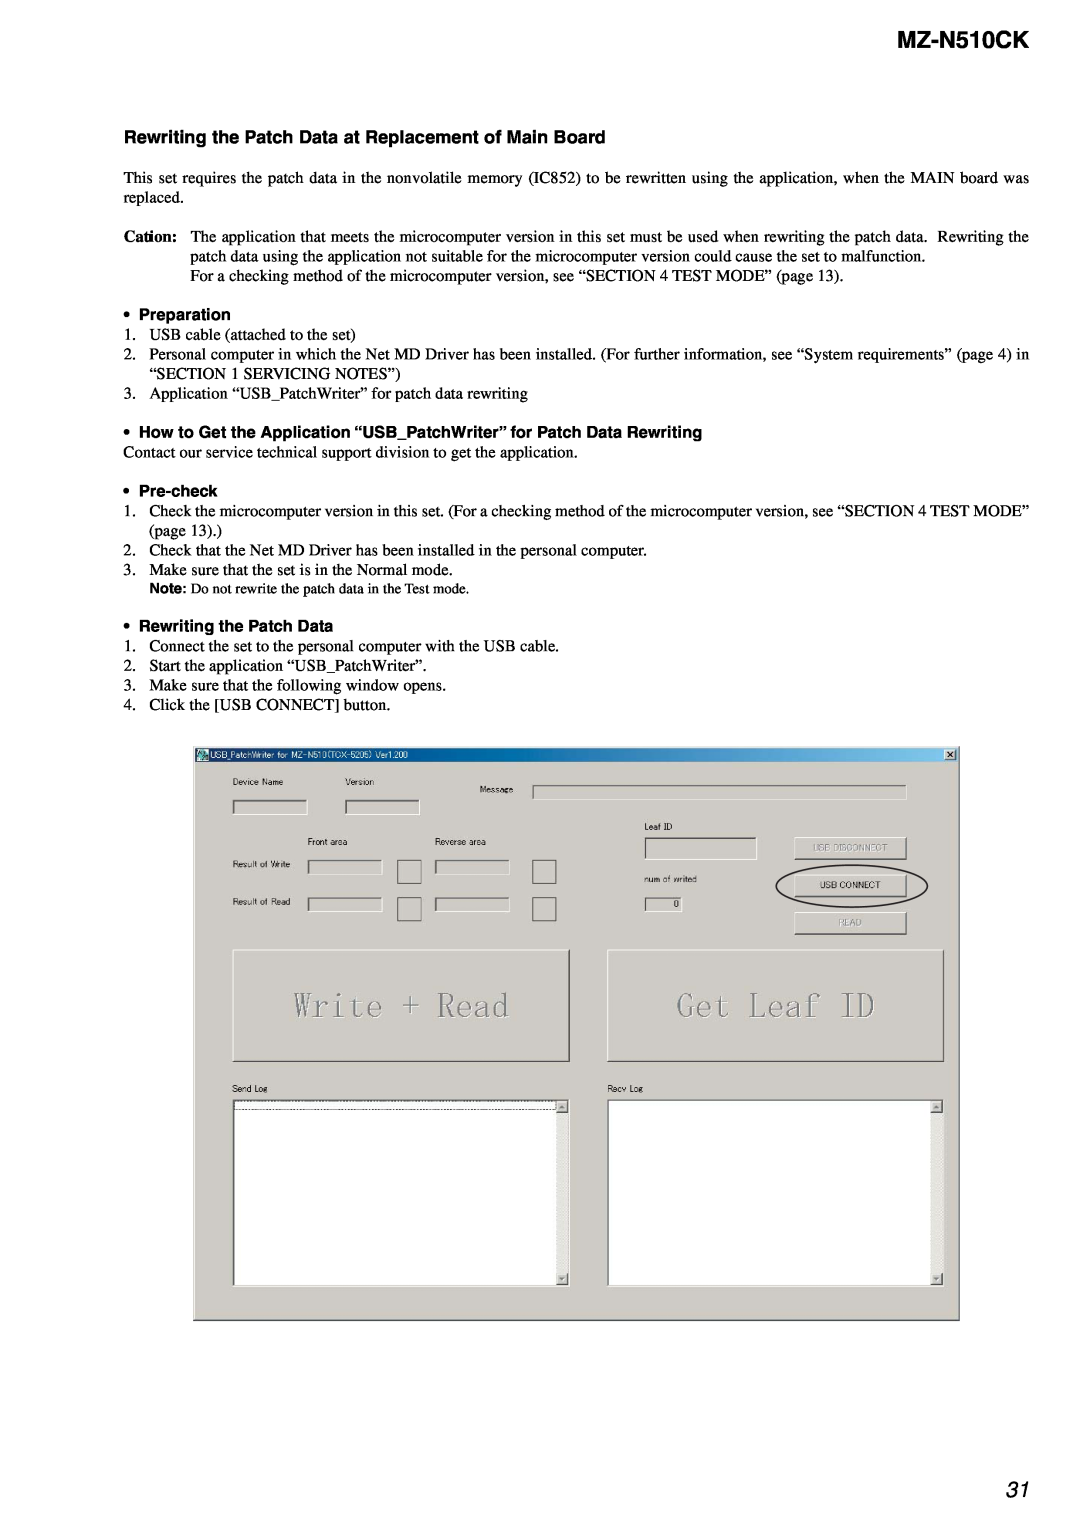 Sony MZ-N510CK service manual Preparation, Pre-check, Rewriting the Patch Data 